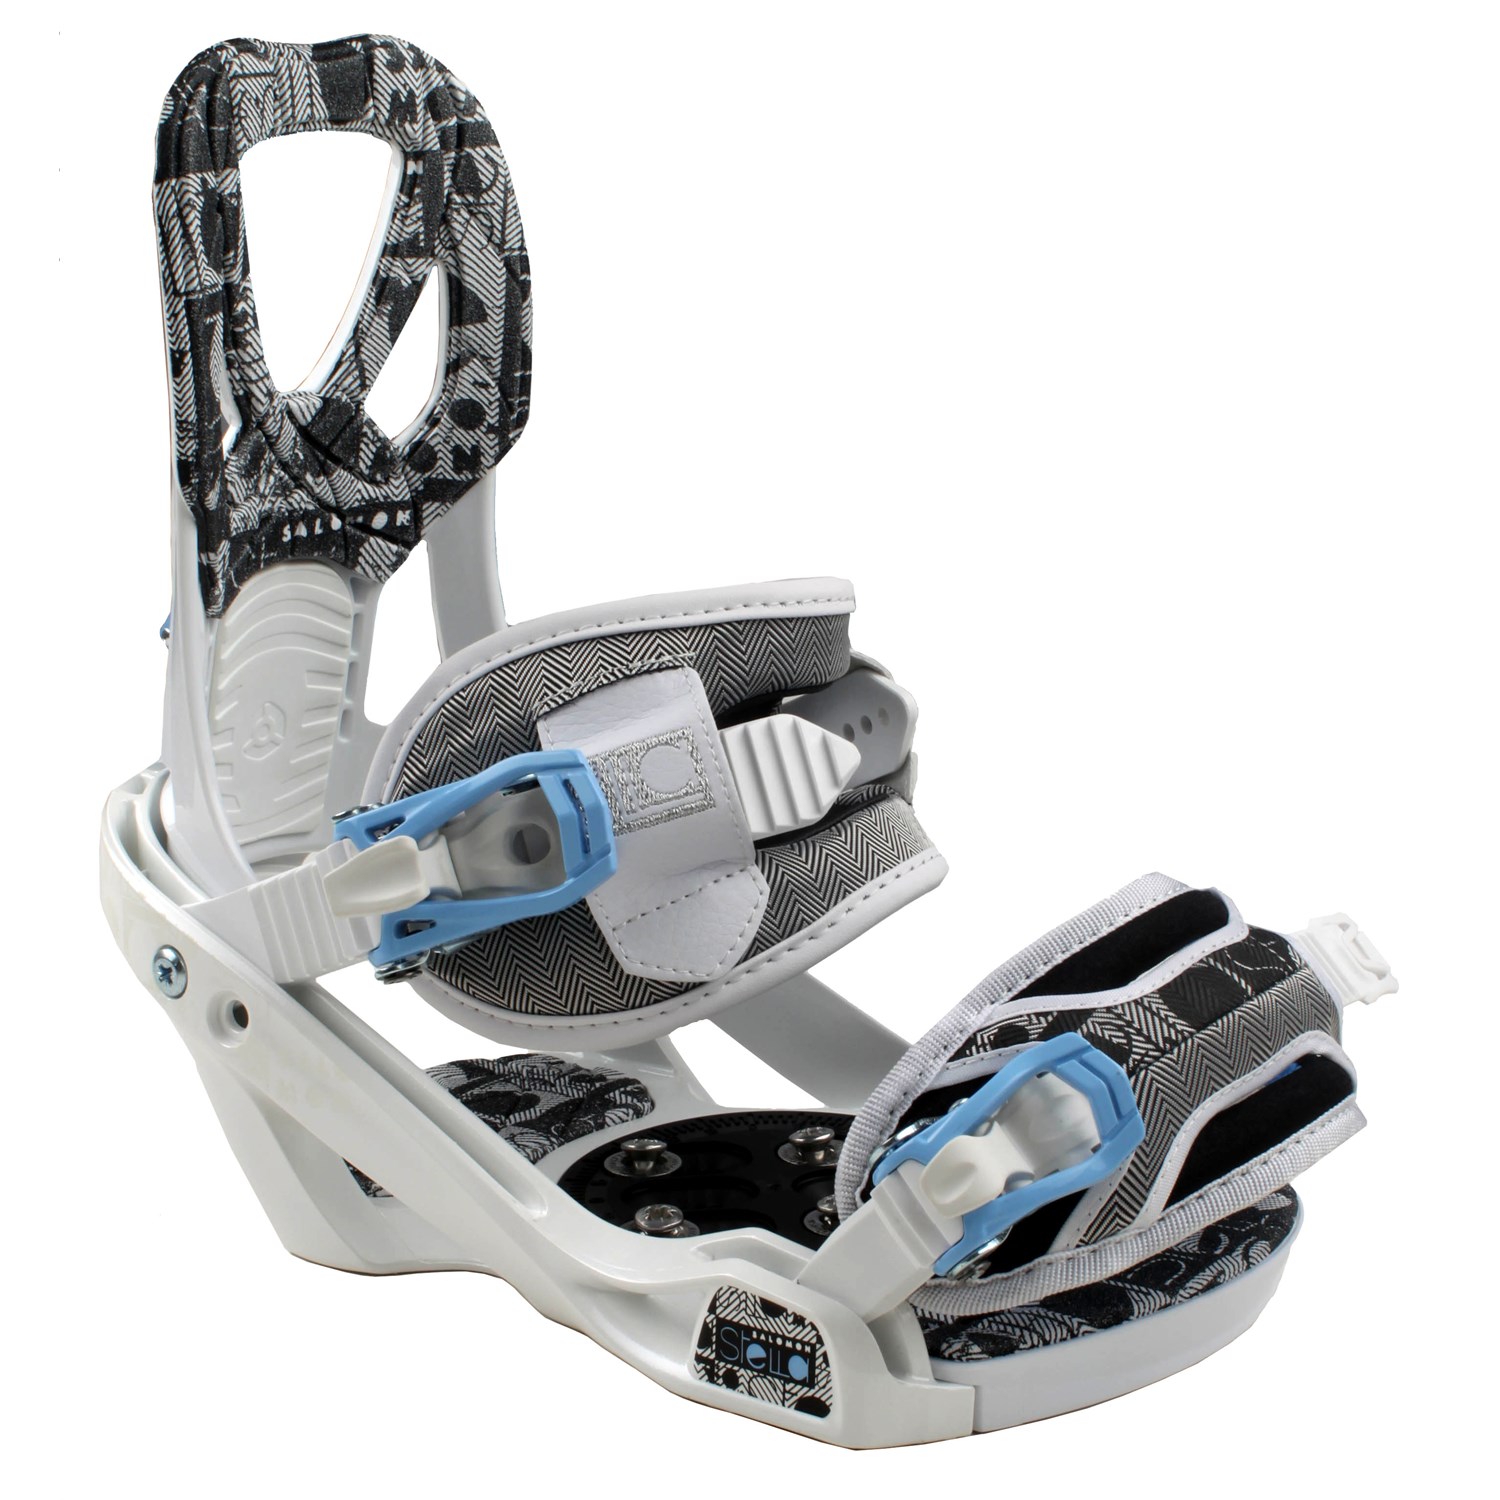 Salomon Stella Snowboard Bindings Womens 2011 Evo intended for The Most Awesome  how to undo snowboard bindings for Dream